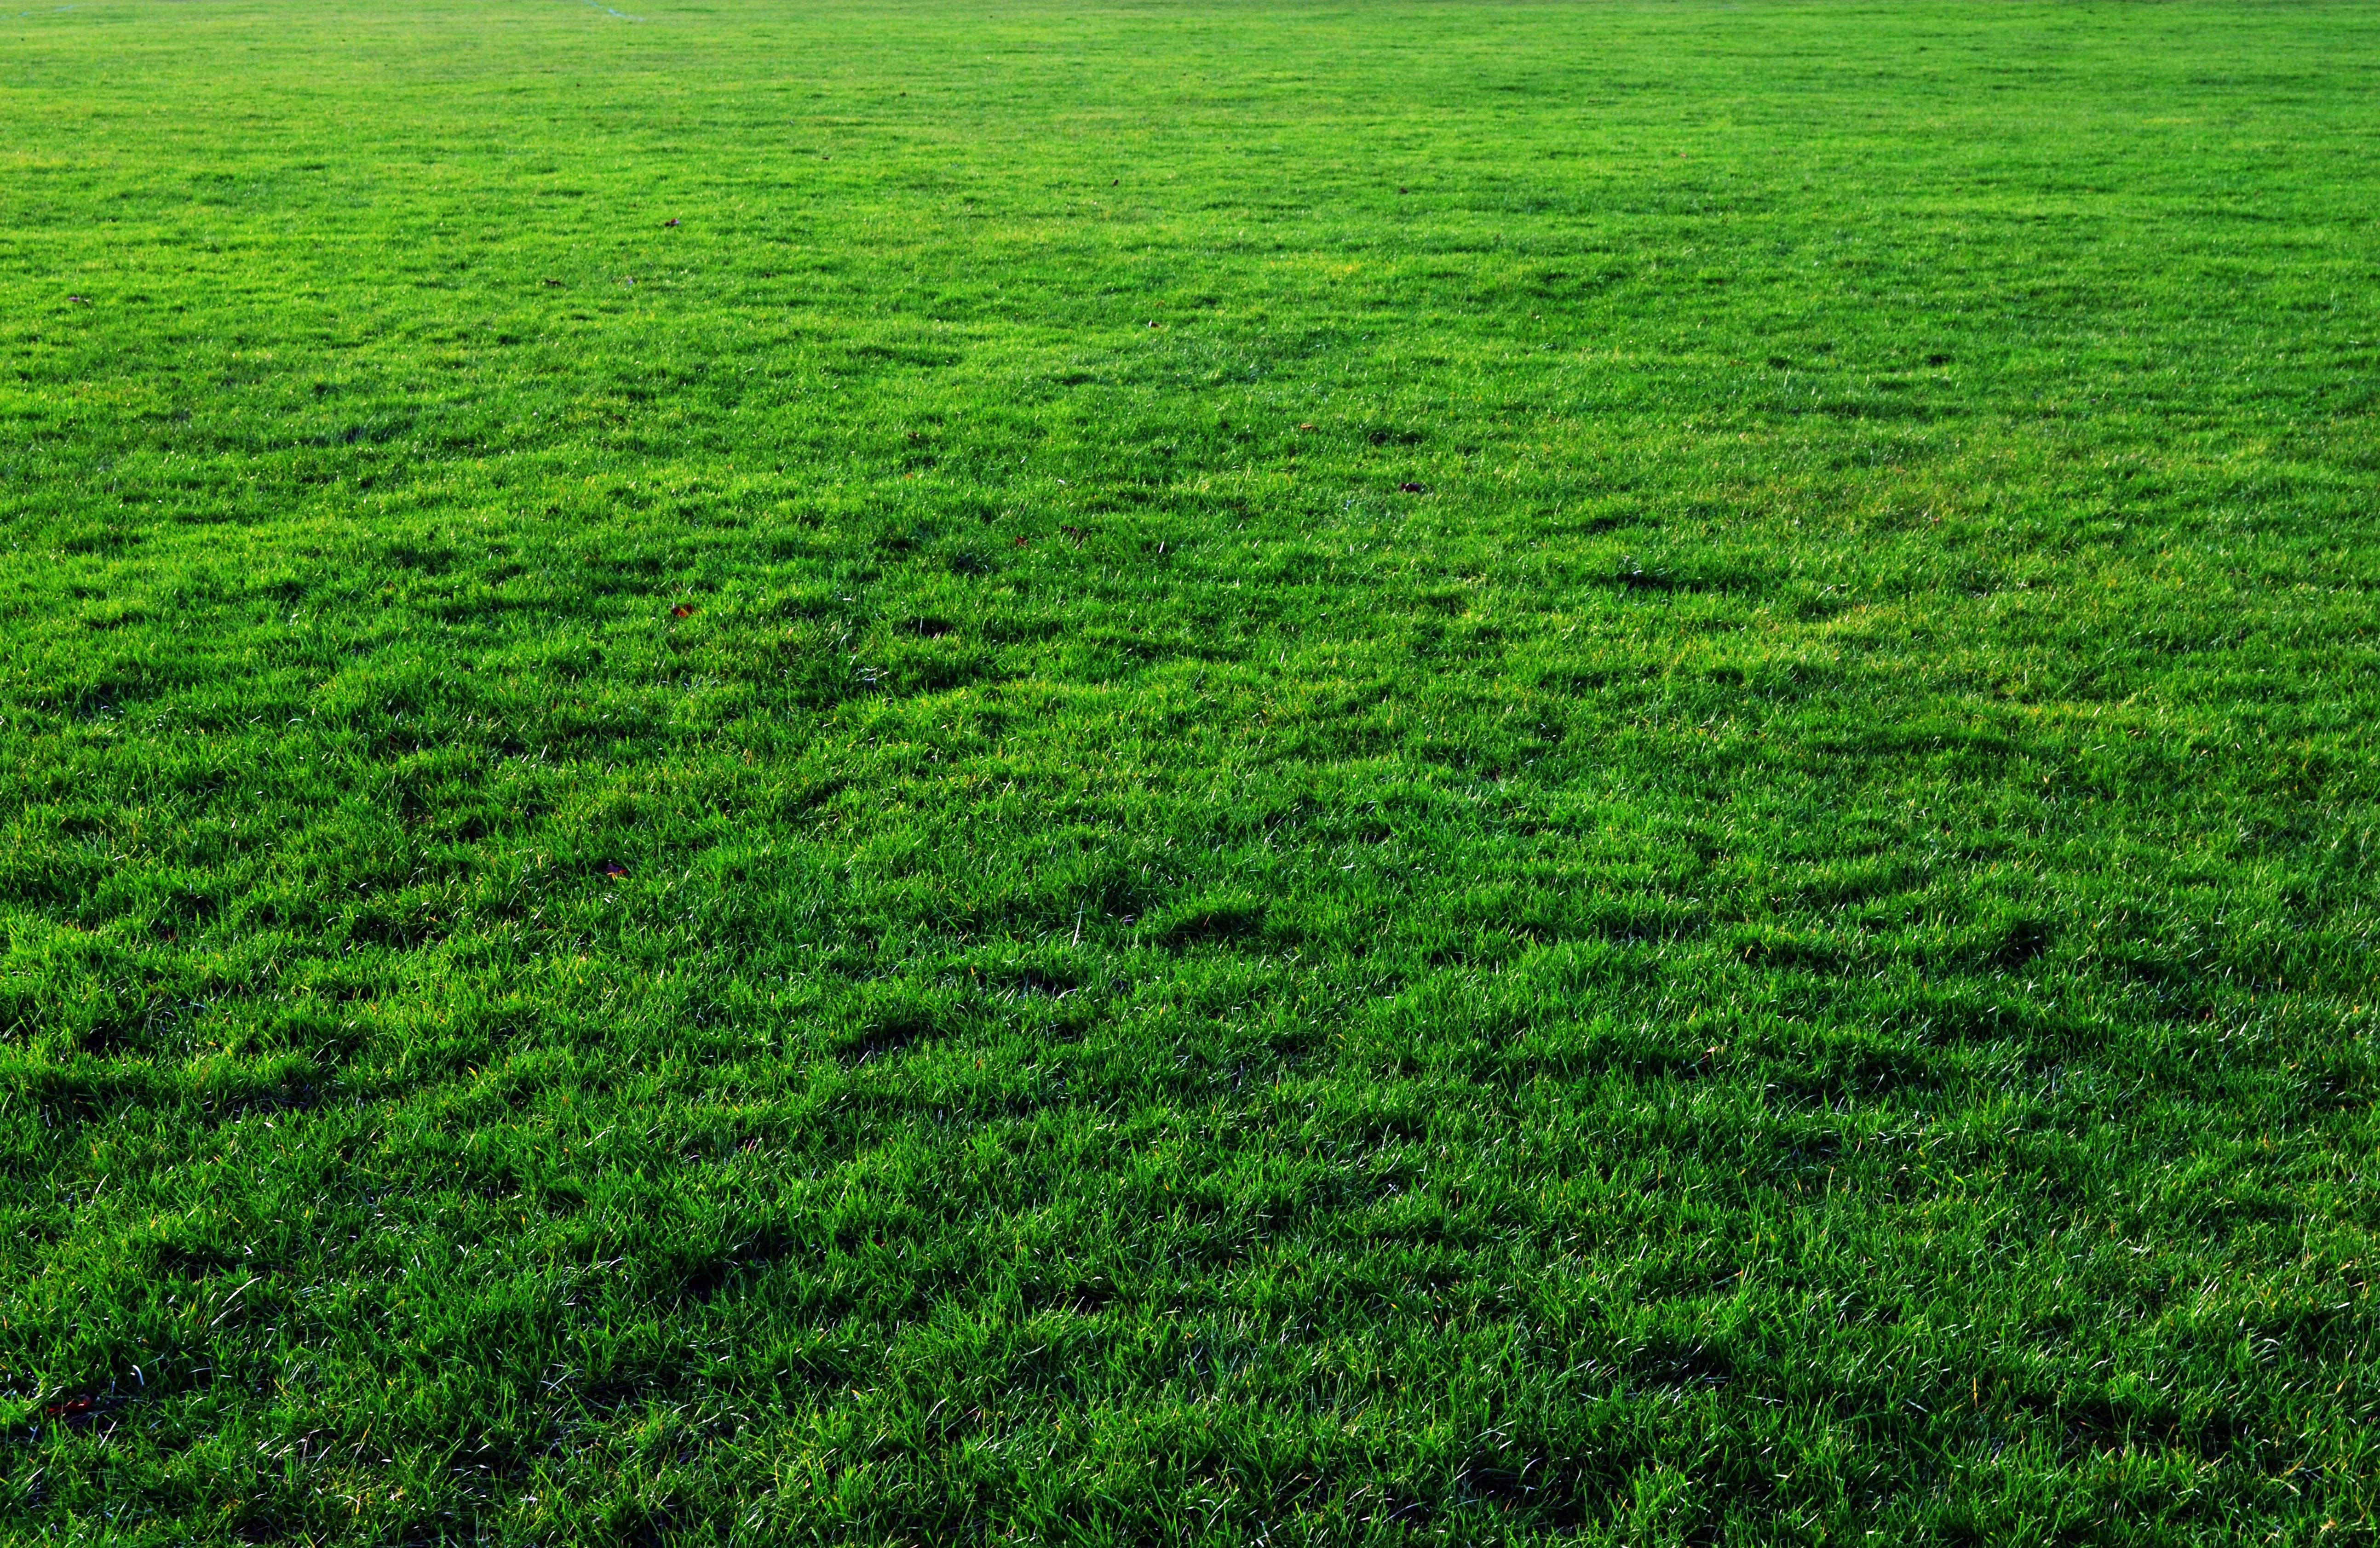 thick free grass texture or green lawn background photo image | www